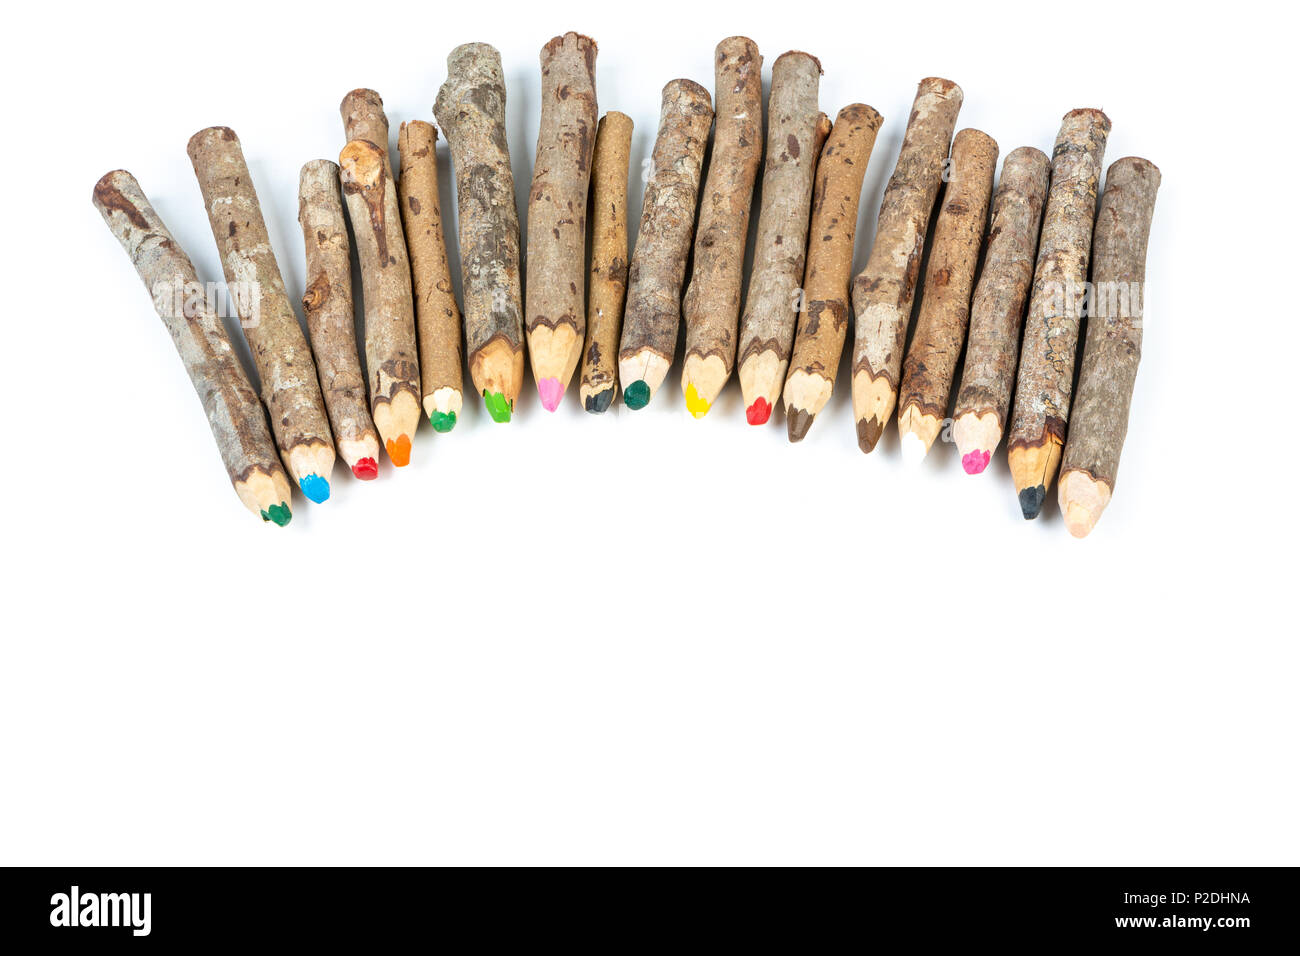 image of wax crayons over white background. Stock Photo